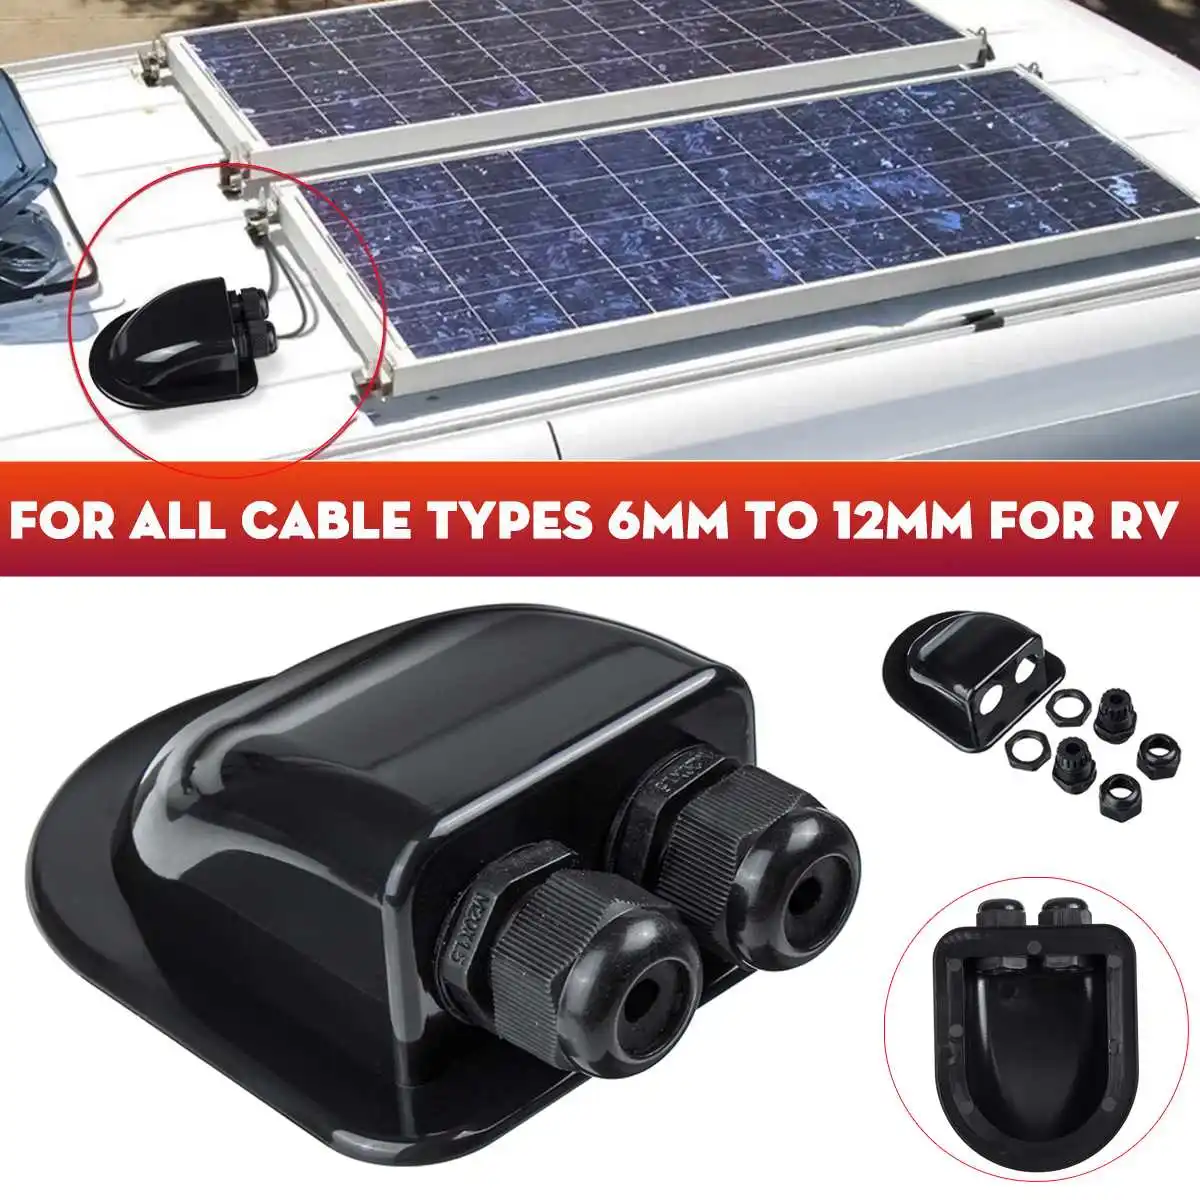 Weatherproof Cable Entry Plate for All Cable Types 4mm² to 12mm² for Solar Project Installation on RV Camper Van Travel Trailer Boat Solar Panels ABS Double Solar-Cable-Entry-Gland-Housing 